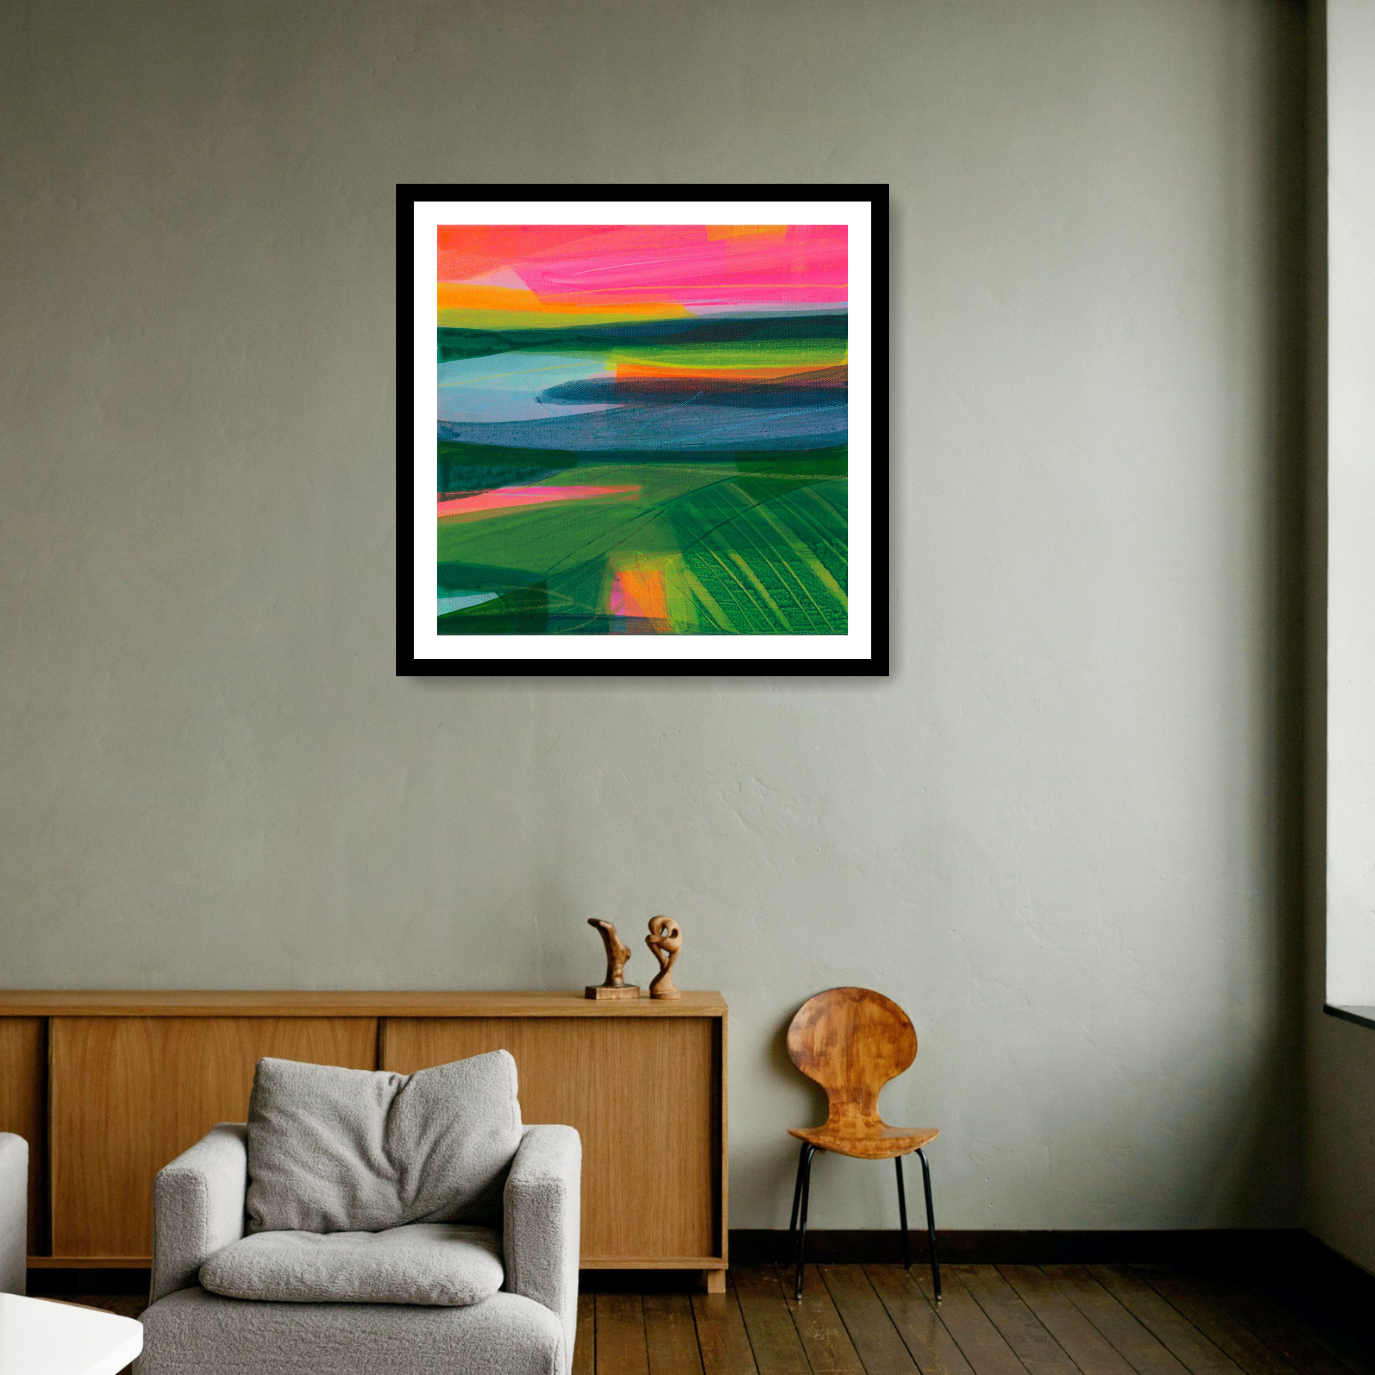 'Embraced by Sussex, 2021' by Faye Bridgwater: a black framed fine art print capturing the vibrant South Downs landscape. Experience the essence of Sussex countryside walks in this contemporary mixed media artwork.